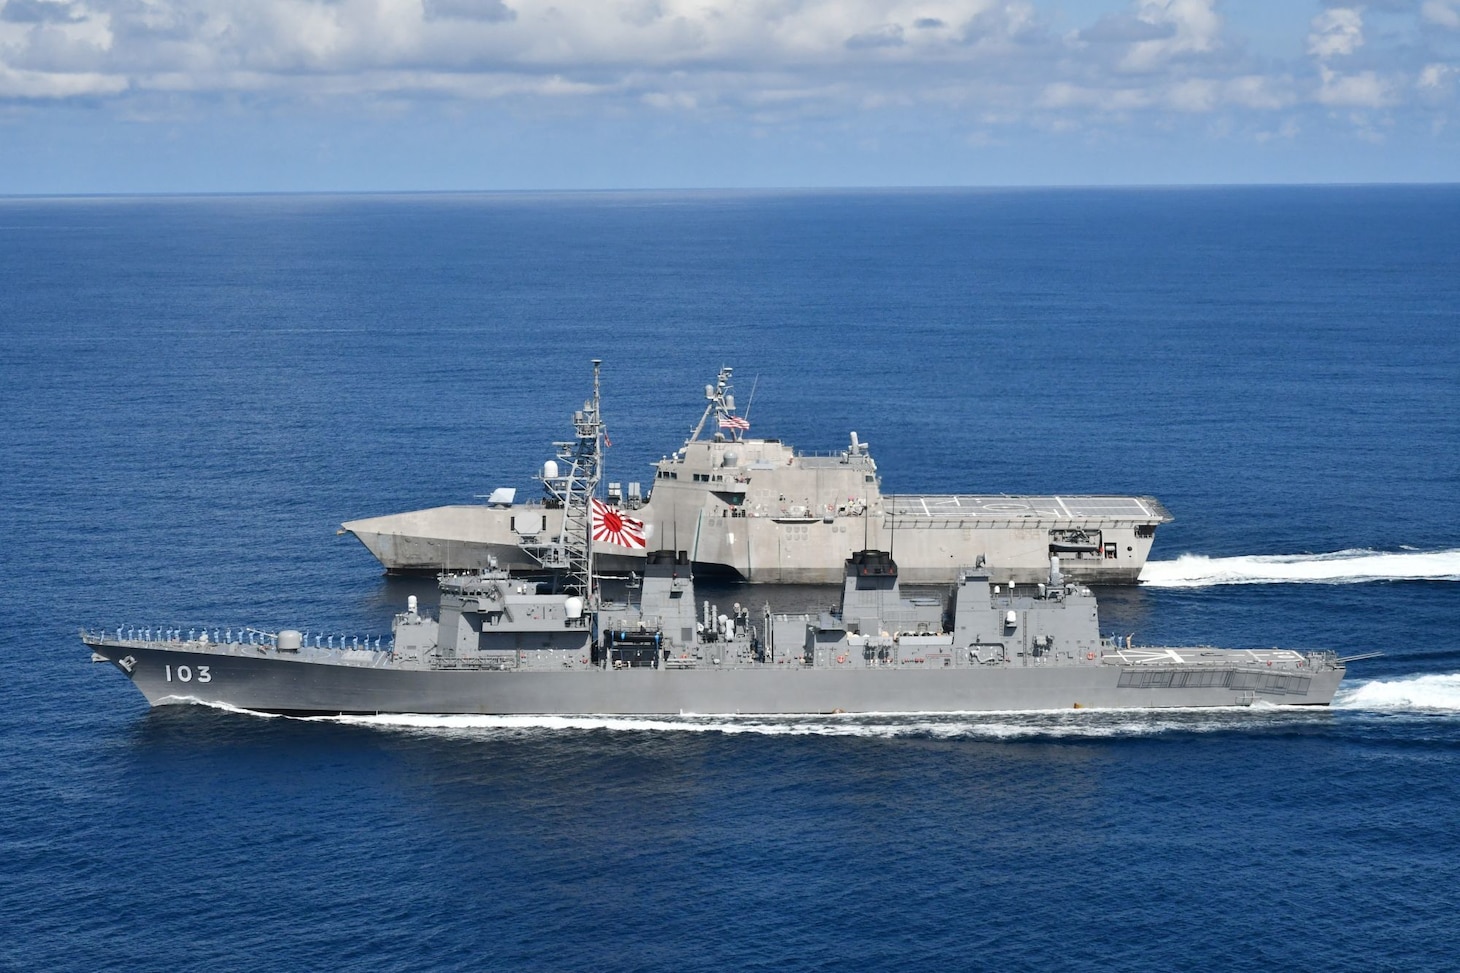 Independence-variant littoral combat ship USS Jackson (LCS 6), top, and Japan Maritime Self-Defense Force Murasame-class destroyer JS Yudachi (DD 103) sail together in the South China Sea. Jackson, part of Destroyer Squadron Seven, are on a rotational deployment in the U.S. 7th Fleet area of operation to enhance interoperability with partners and serve as a ready-response force in support of a free and open Indo-Pacific region.